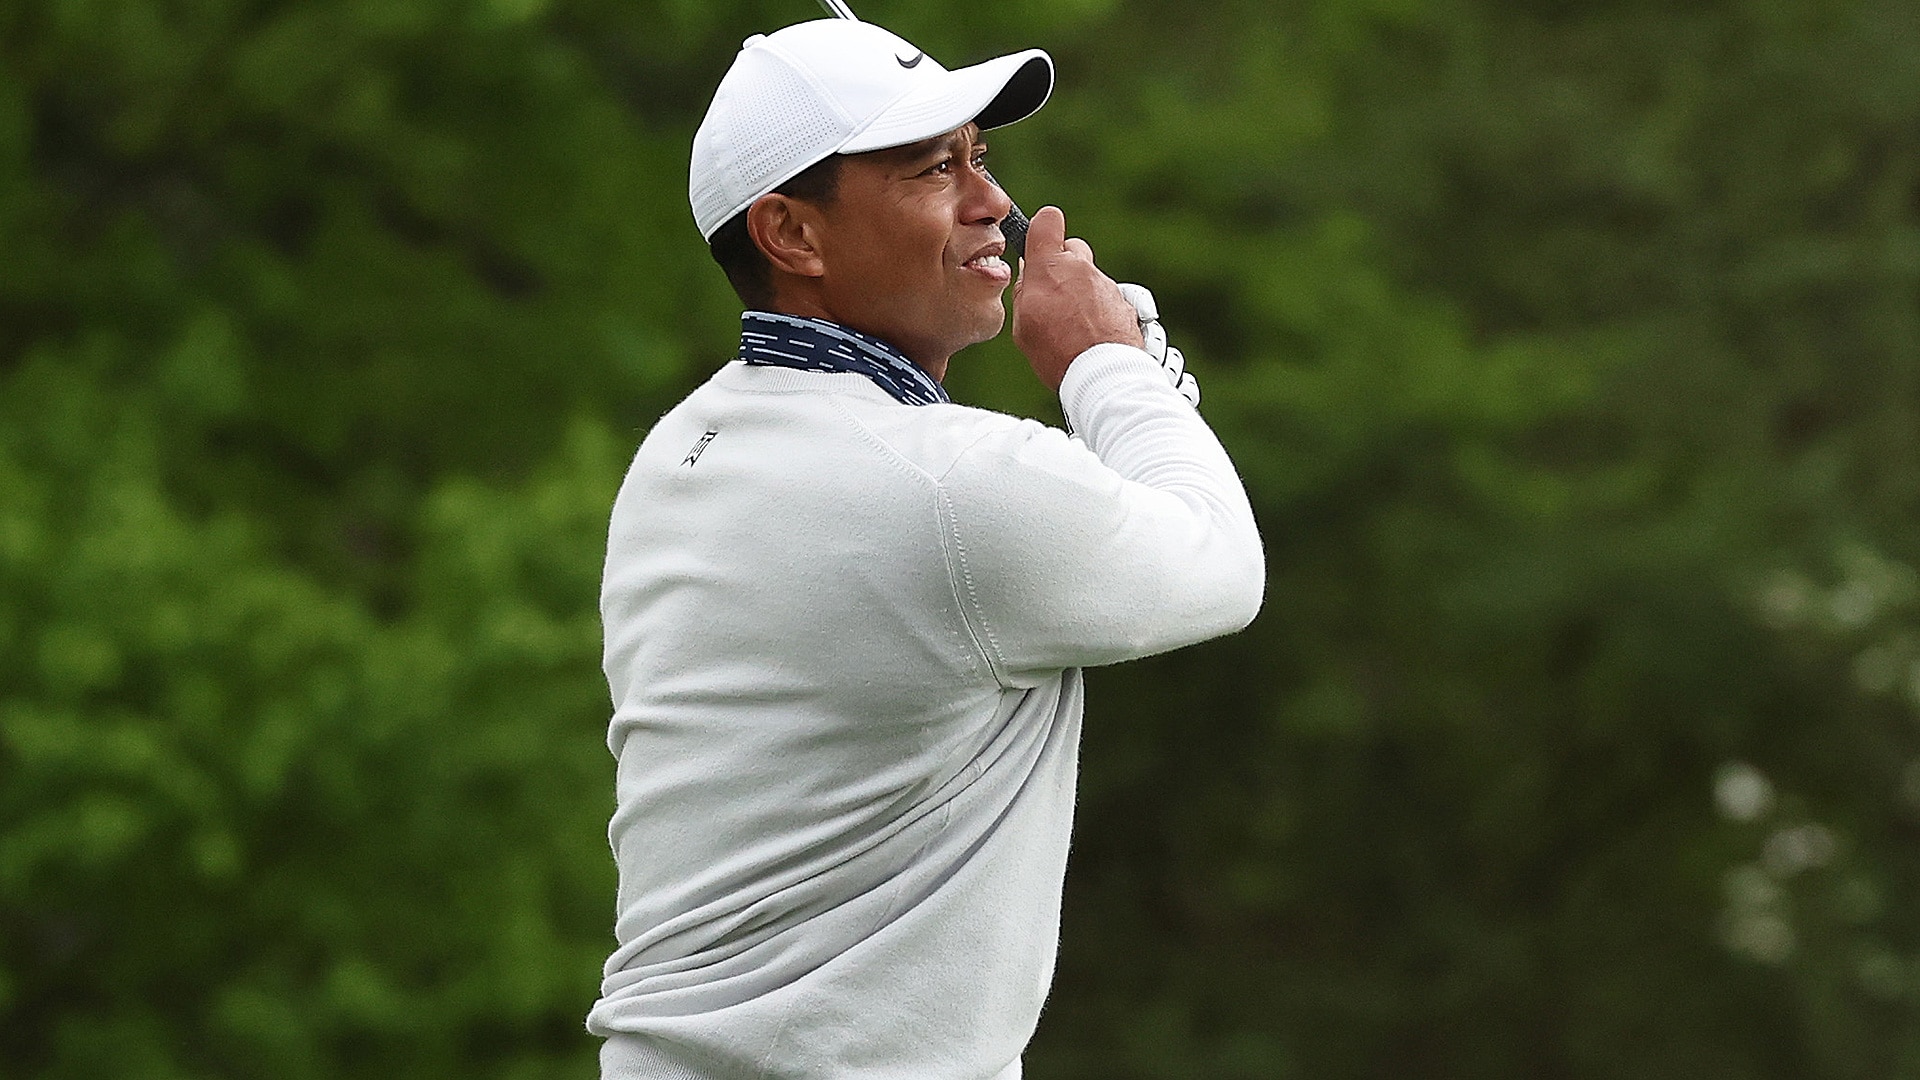 Highlights: Tiger Woods hits tee shot 364 yards on chilly Saturday at Augusta